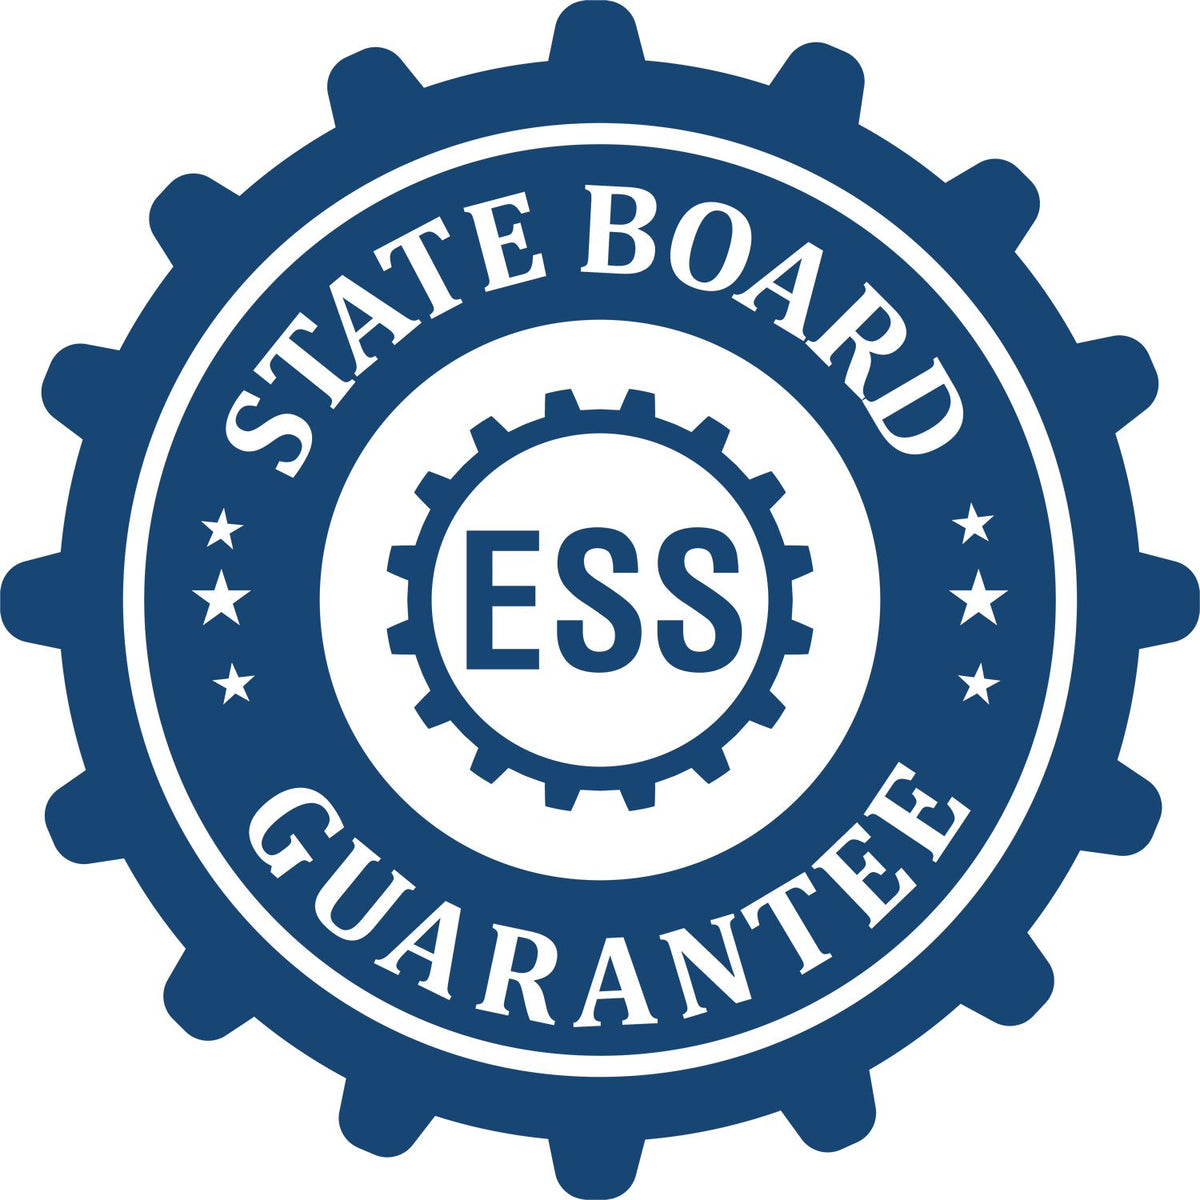 An emblem in a gear shape illustrating a state board guarantee for the State of North Dakota Extended Long Reach Geologist Seal